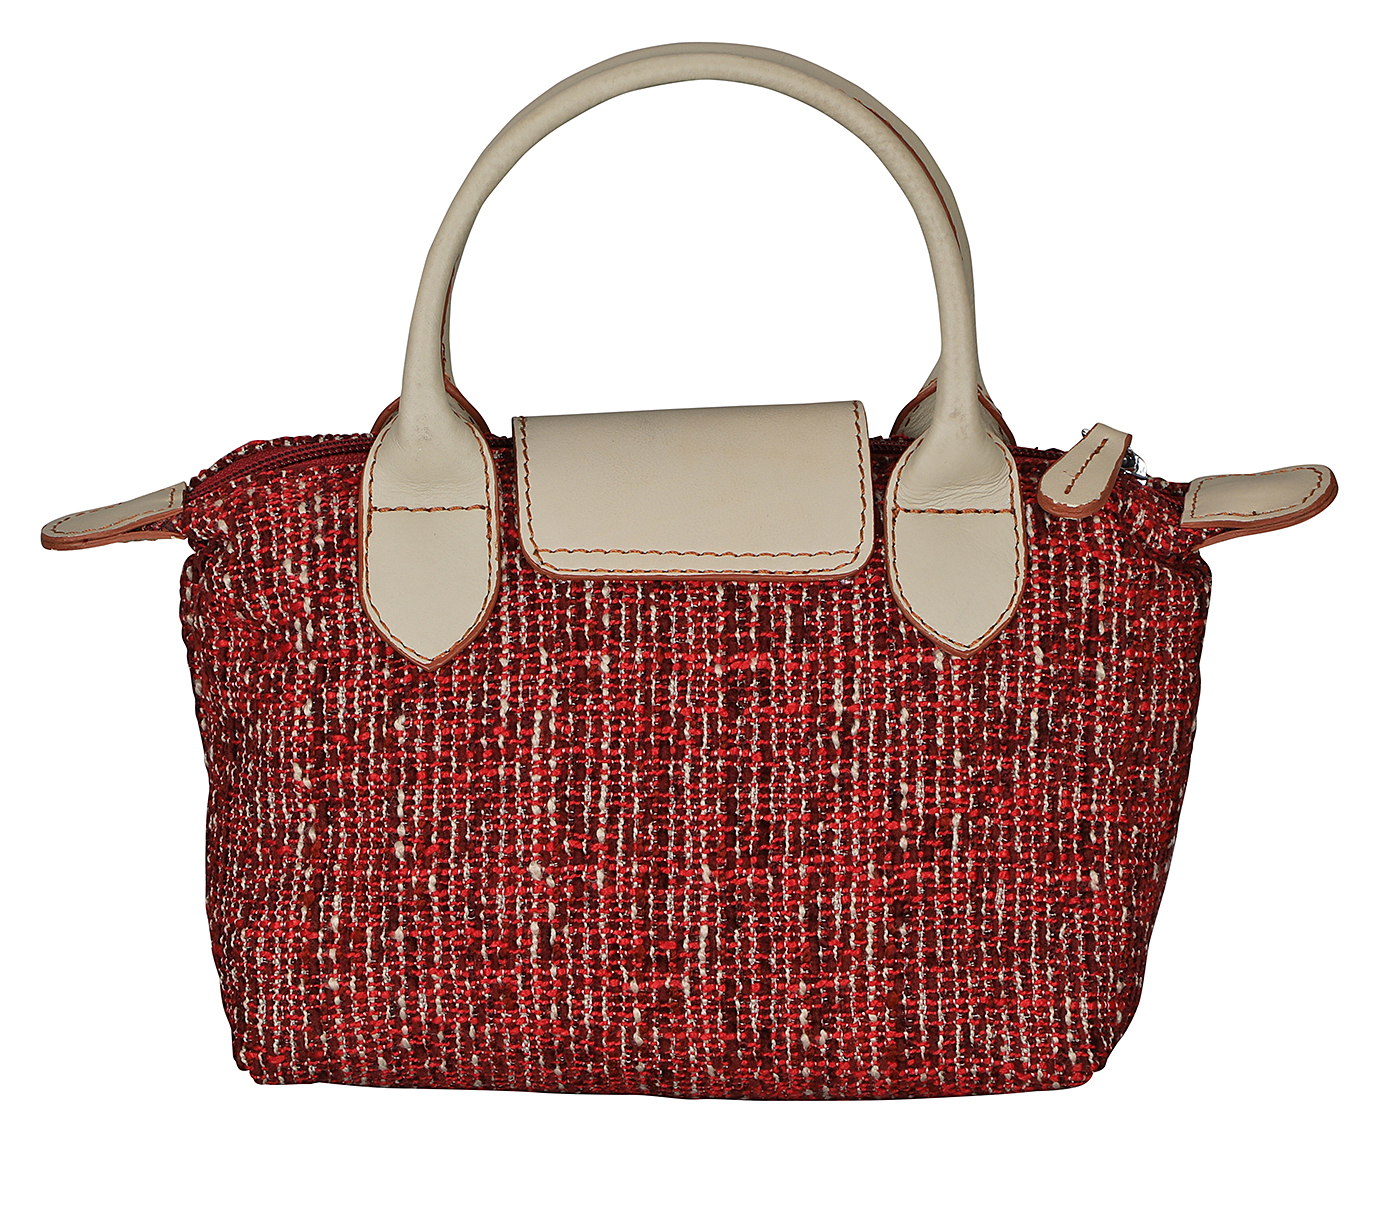 B883--Abene mini tote  in leaf print material with genuine leather handles and flap - Red